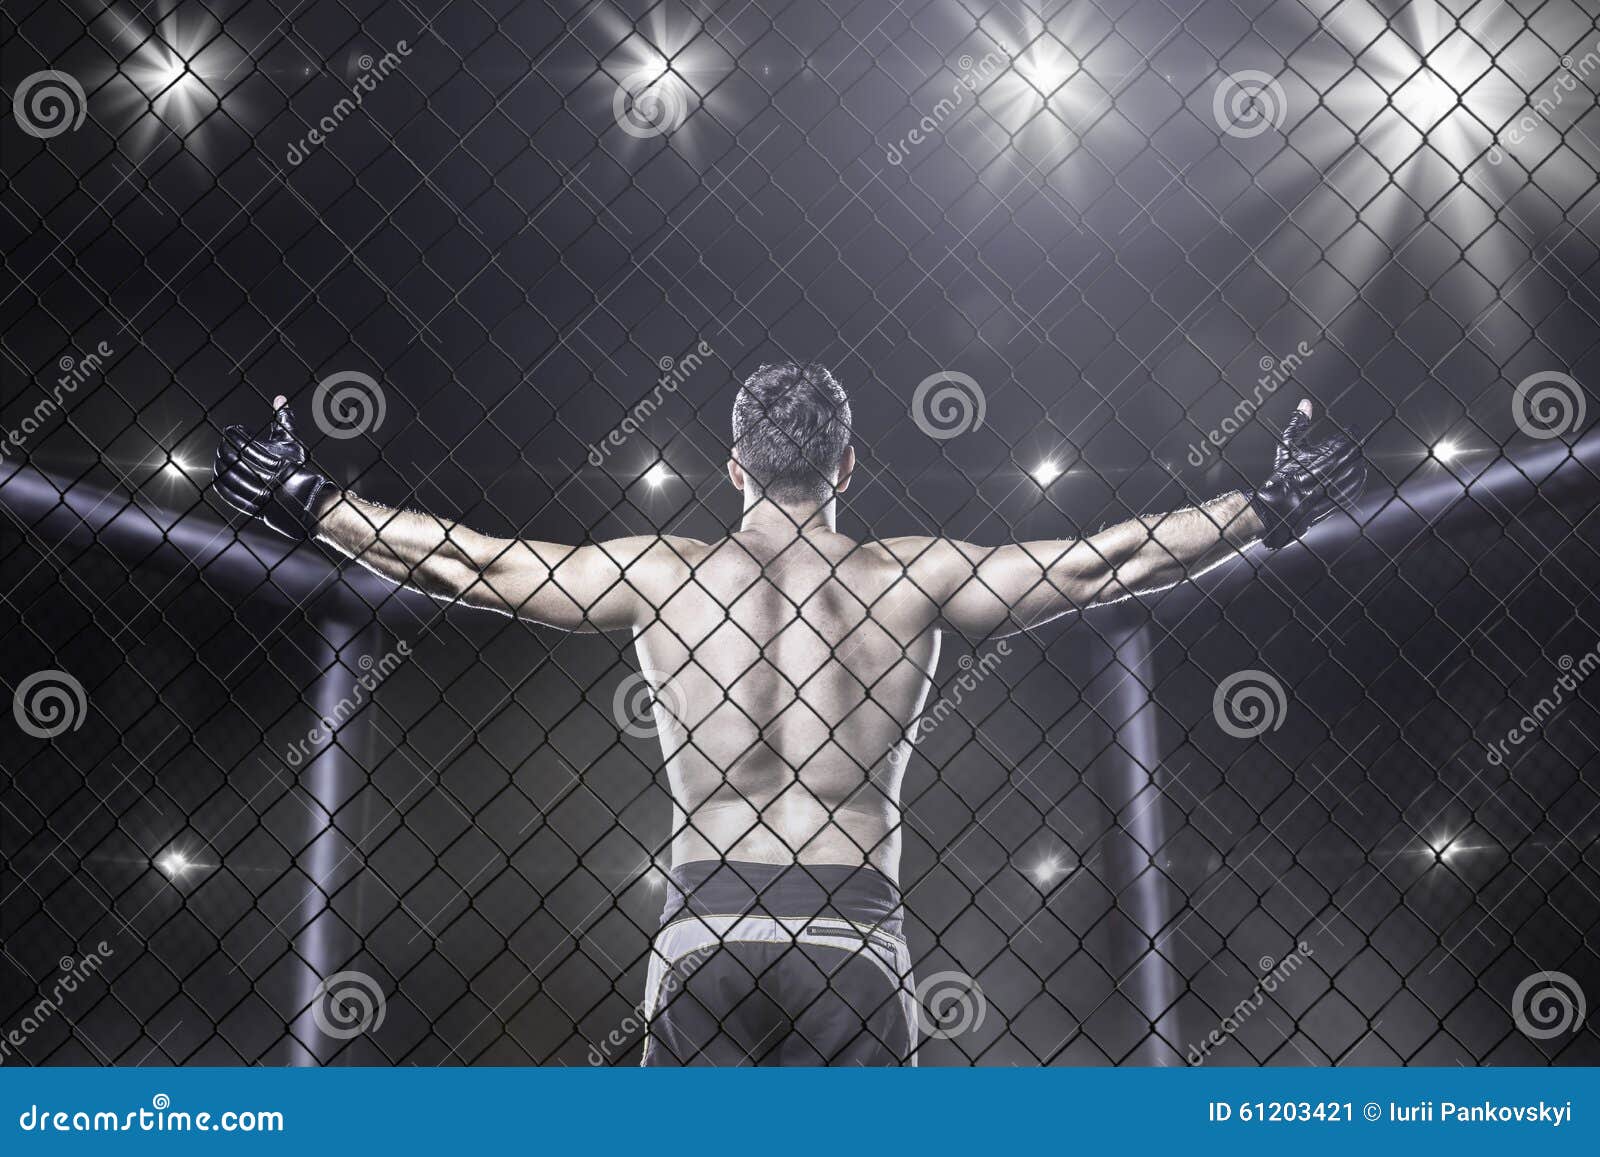 mma fighter in arena celebrating win, behind view